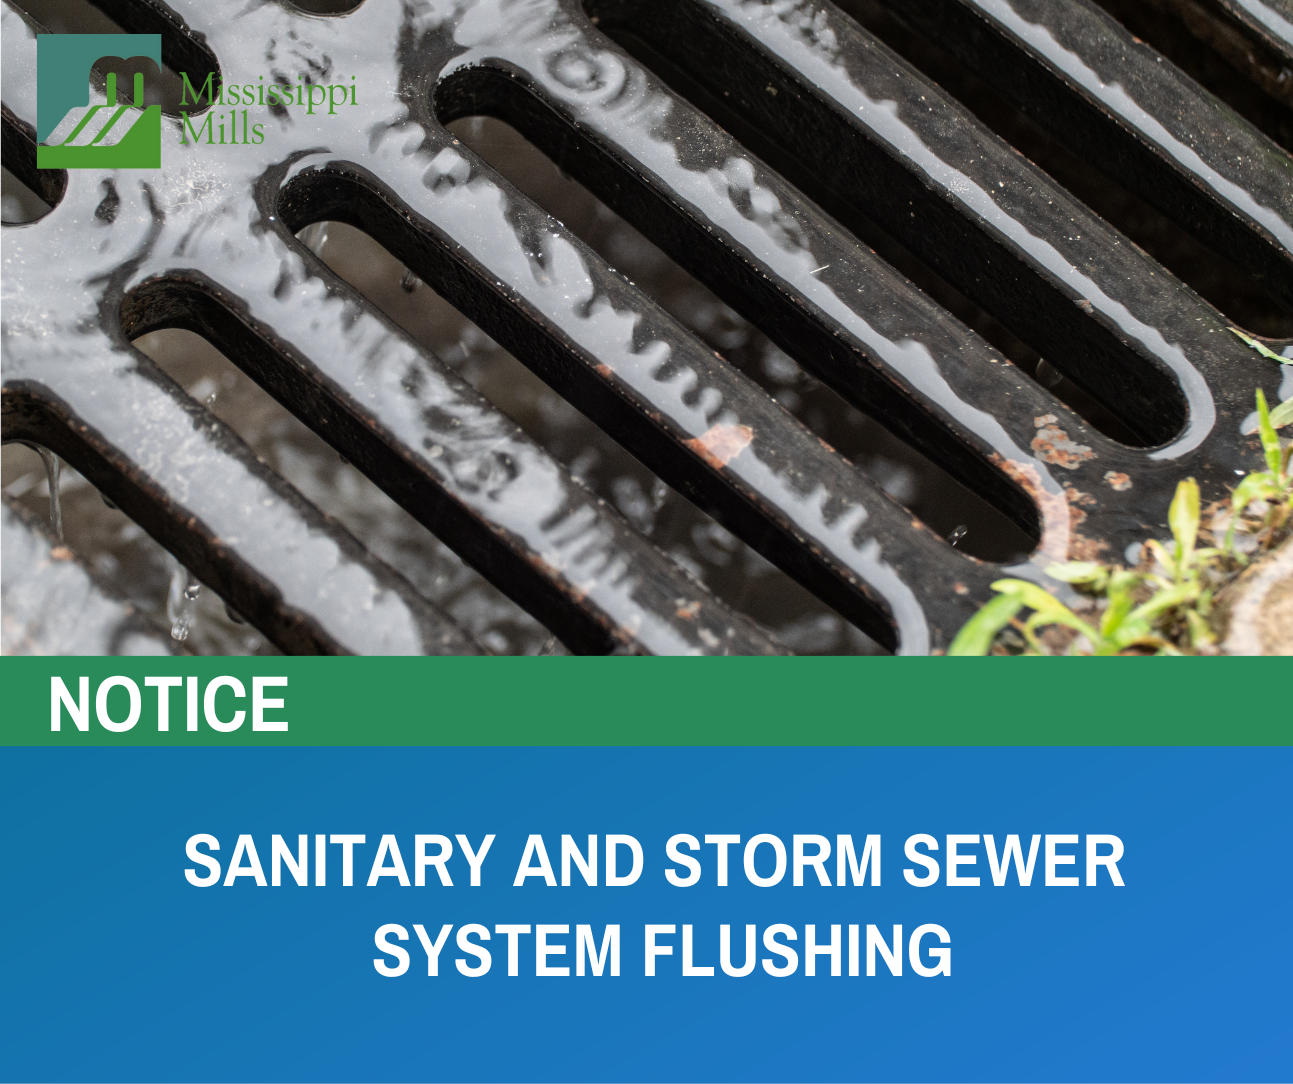 Green and blue graphic with photo of a storm drain and text 'Notice: Sanitary and Stormwater System Flushing'